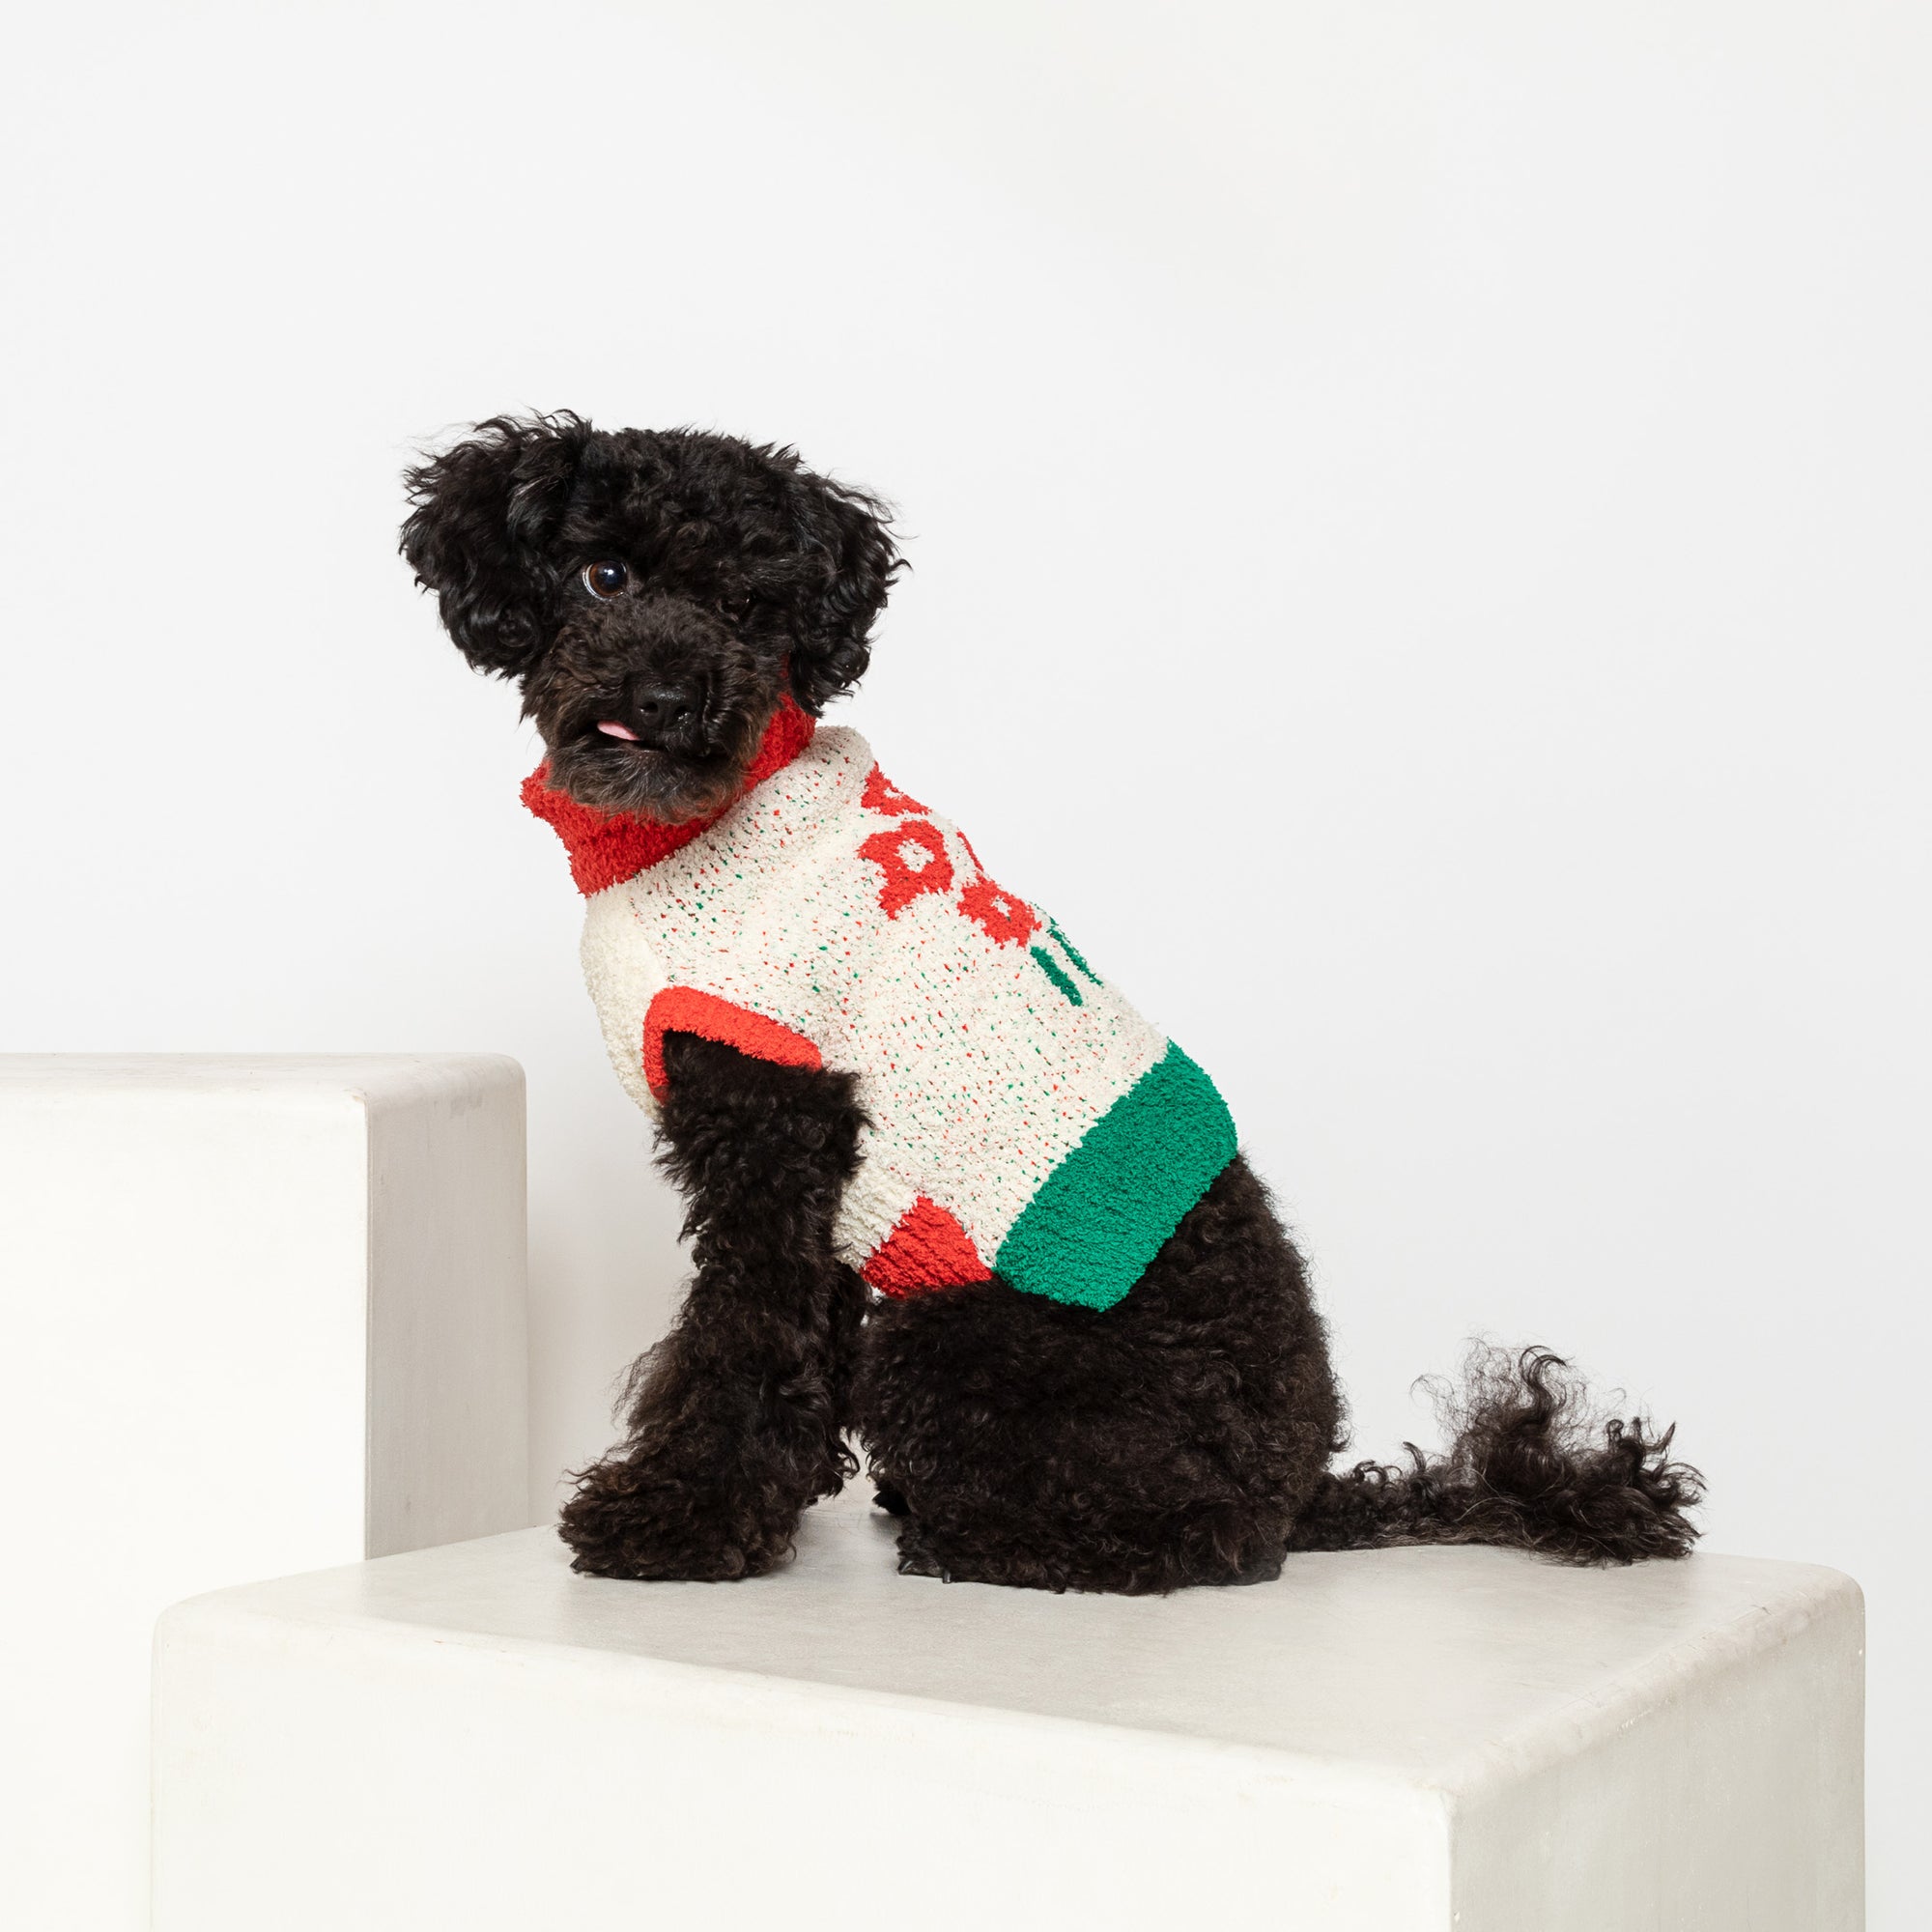 Black poodle in "The Furryfolks" brand red and green flower sweater on a white block.